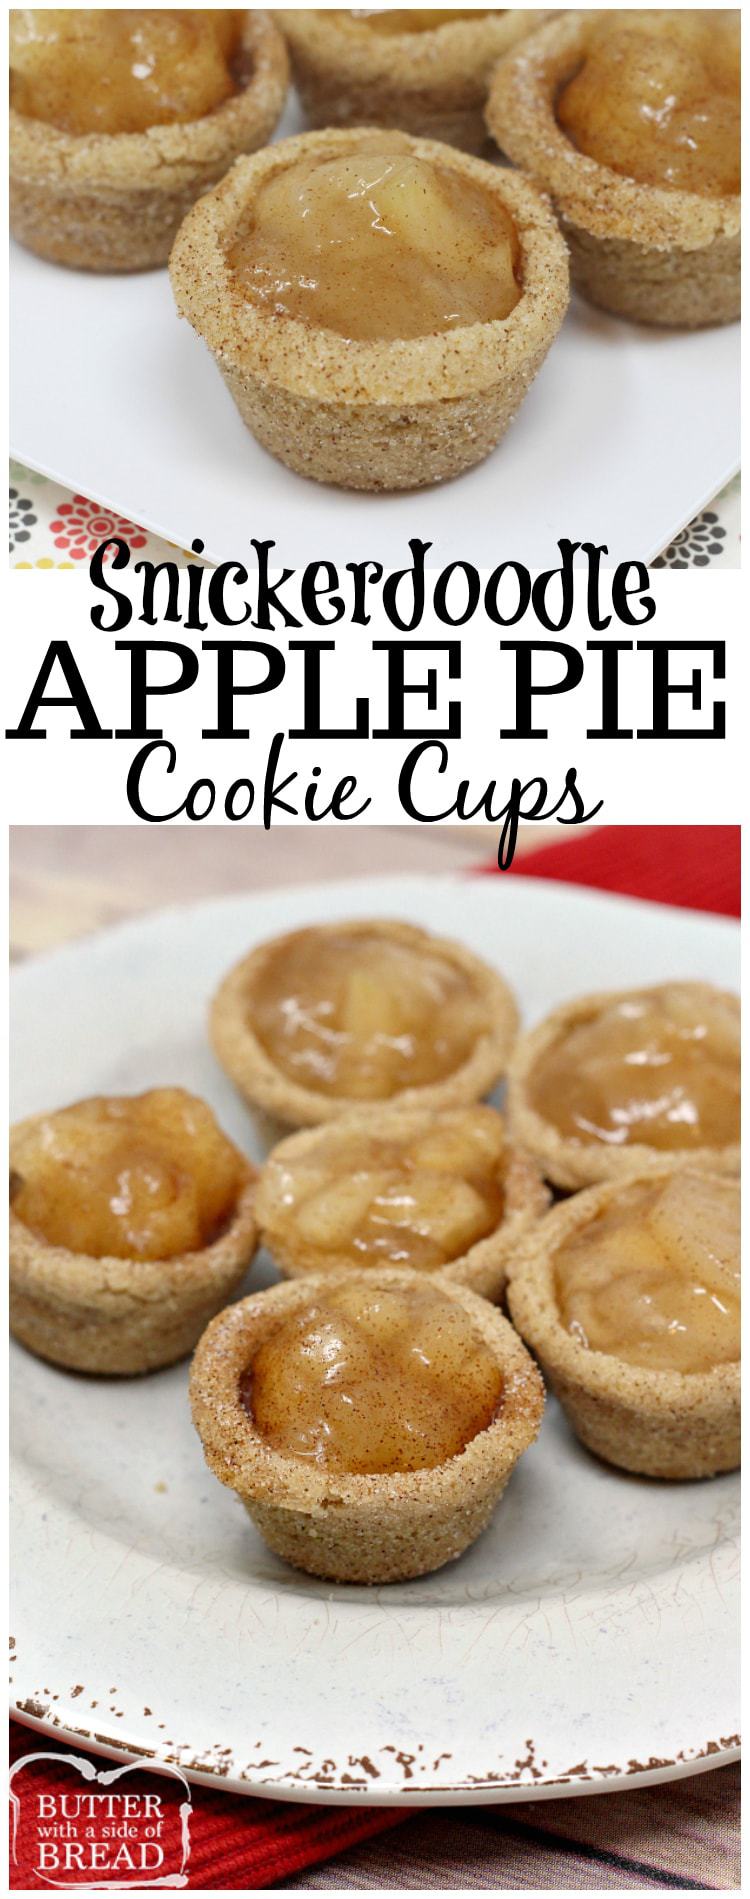  Snickerdoodle Apple Pie Cookie Cups combine two favorite desserts in a bite sized treat! Mini apple pies with a snickerdoodle cookie crust!